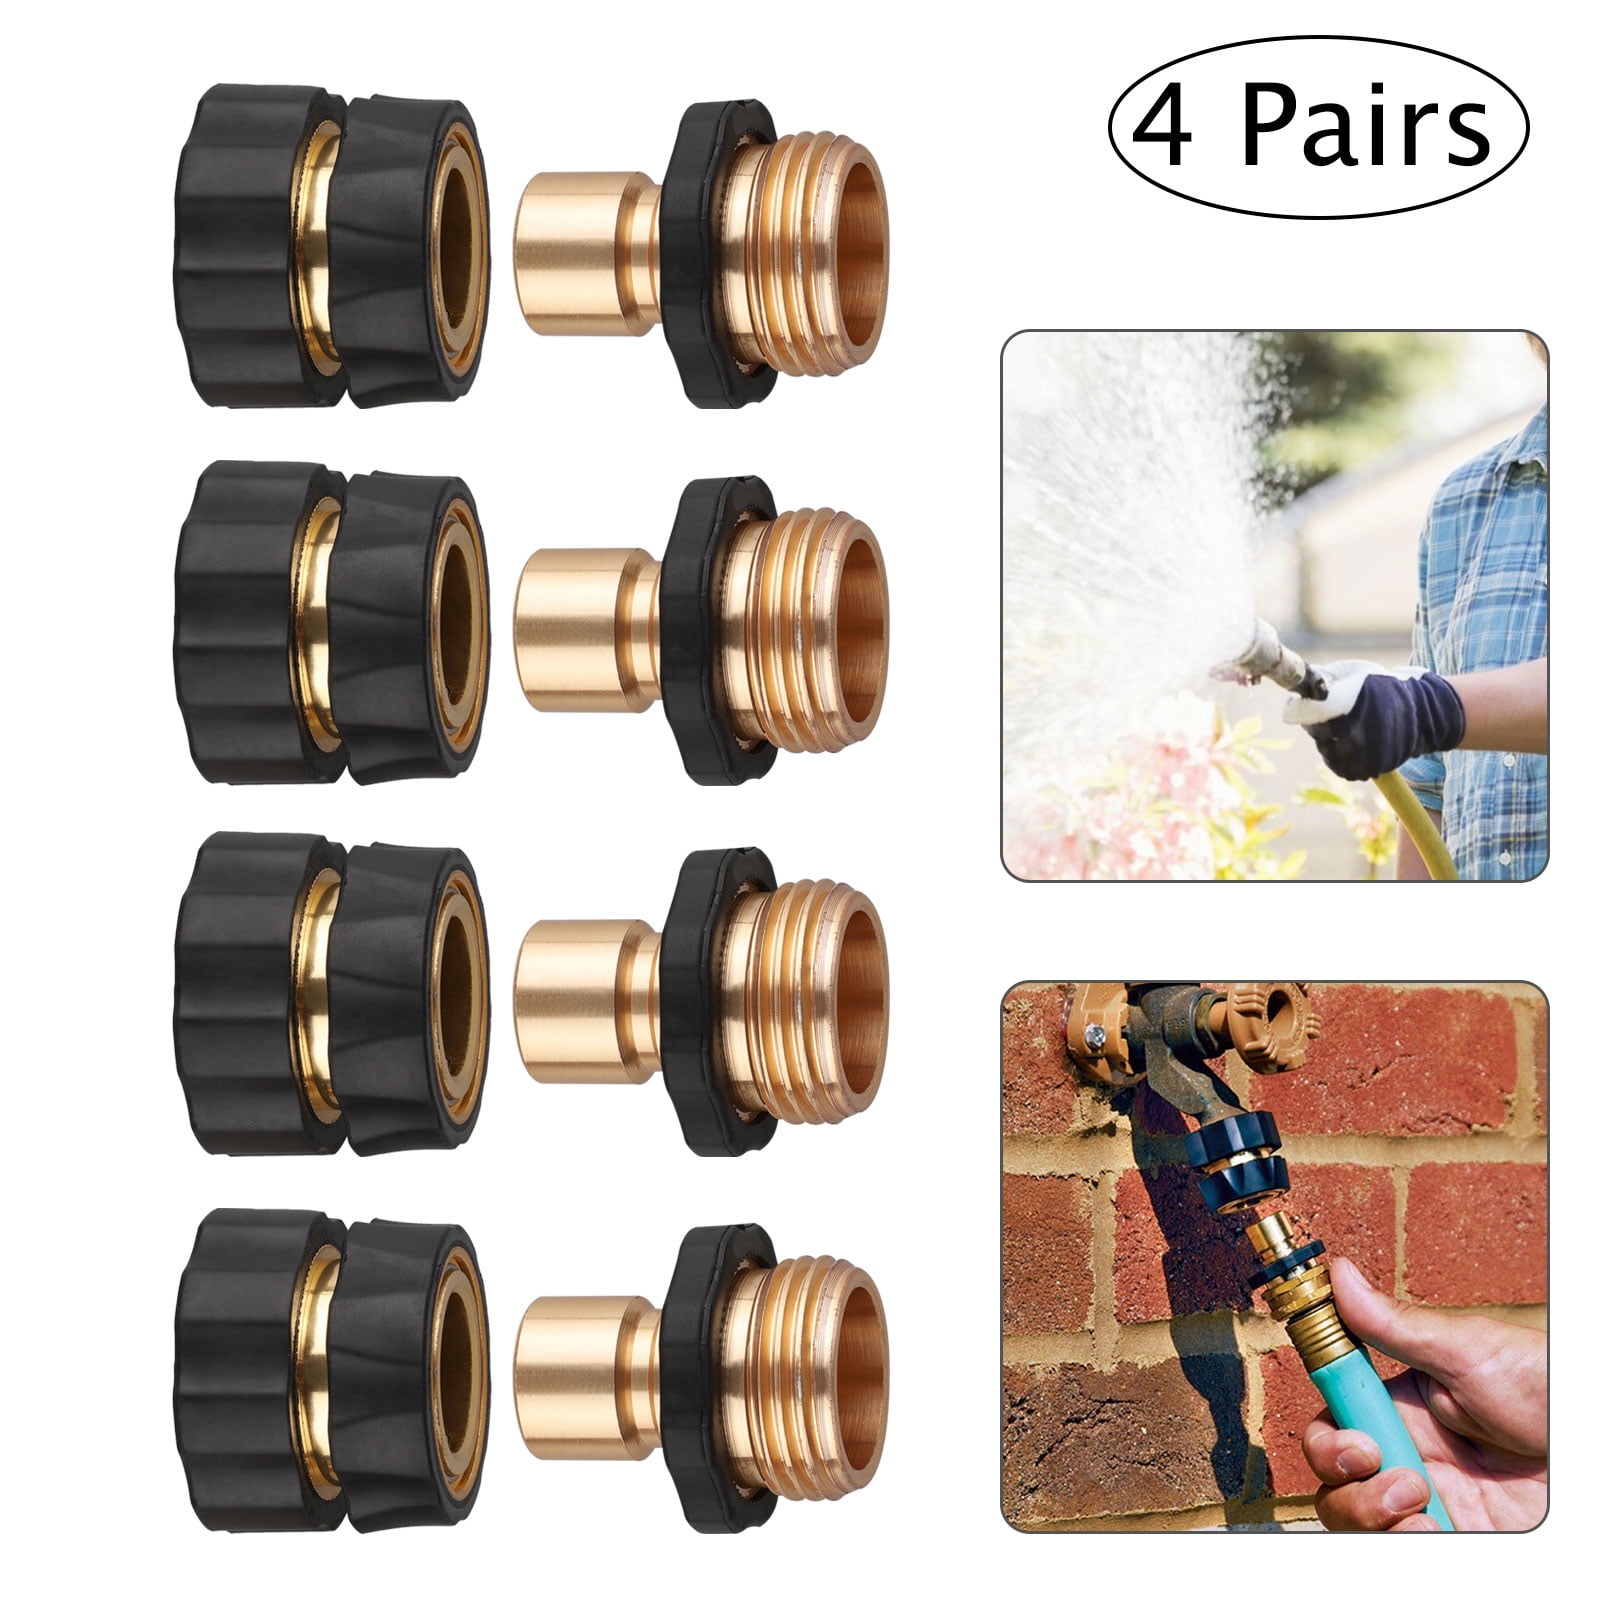 Garden Hose Quick Connect Female Brass Connector Fitting Water Hose Adapter 